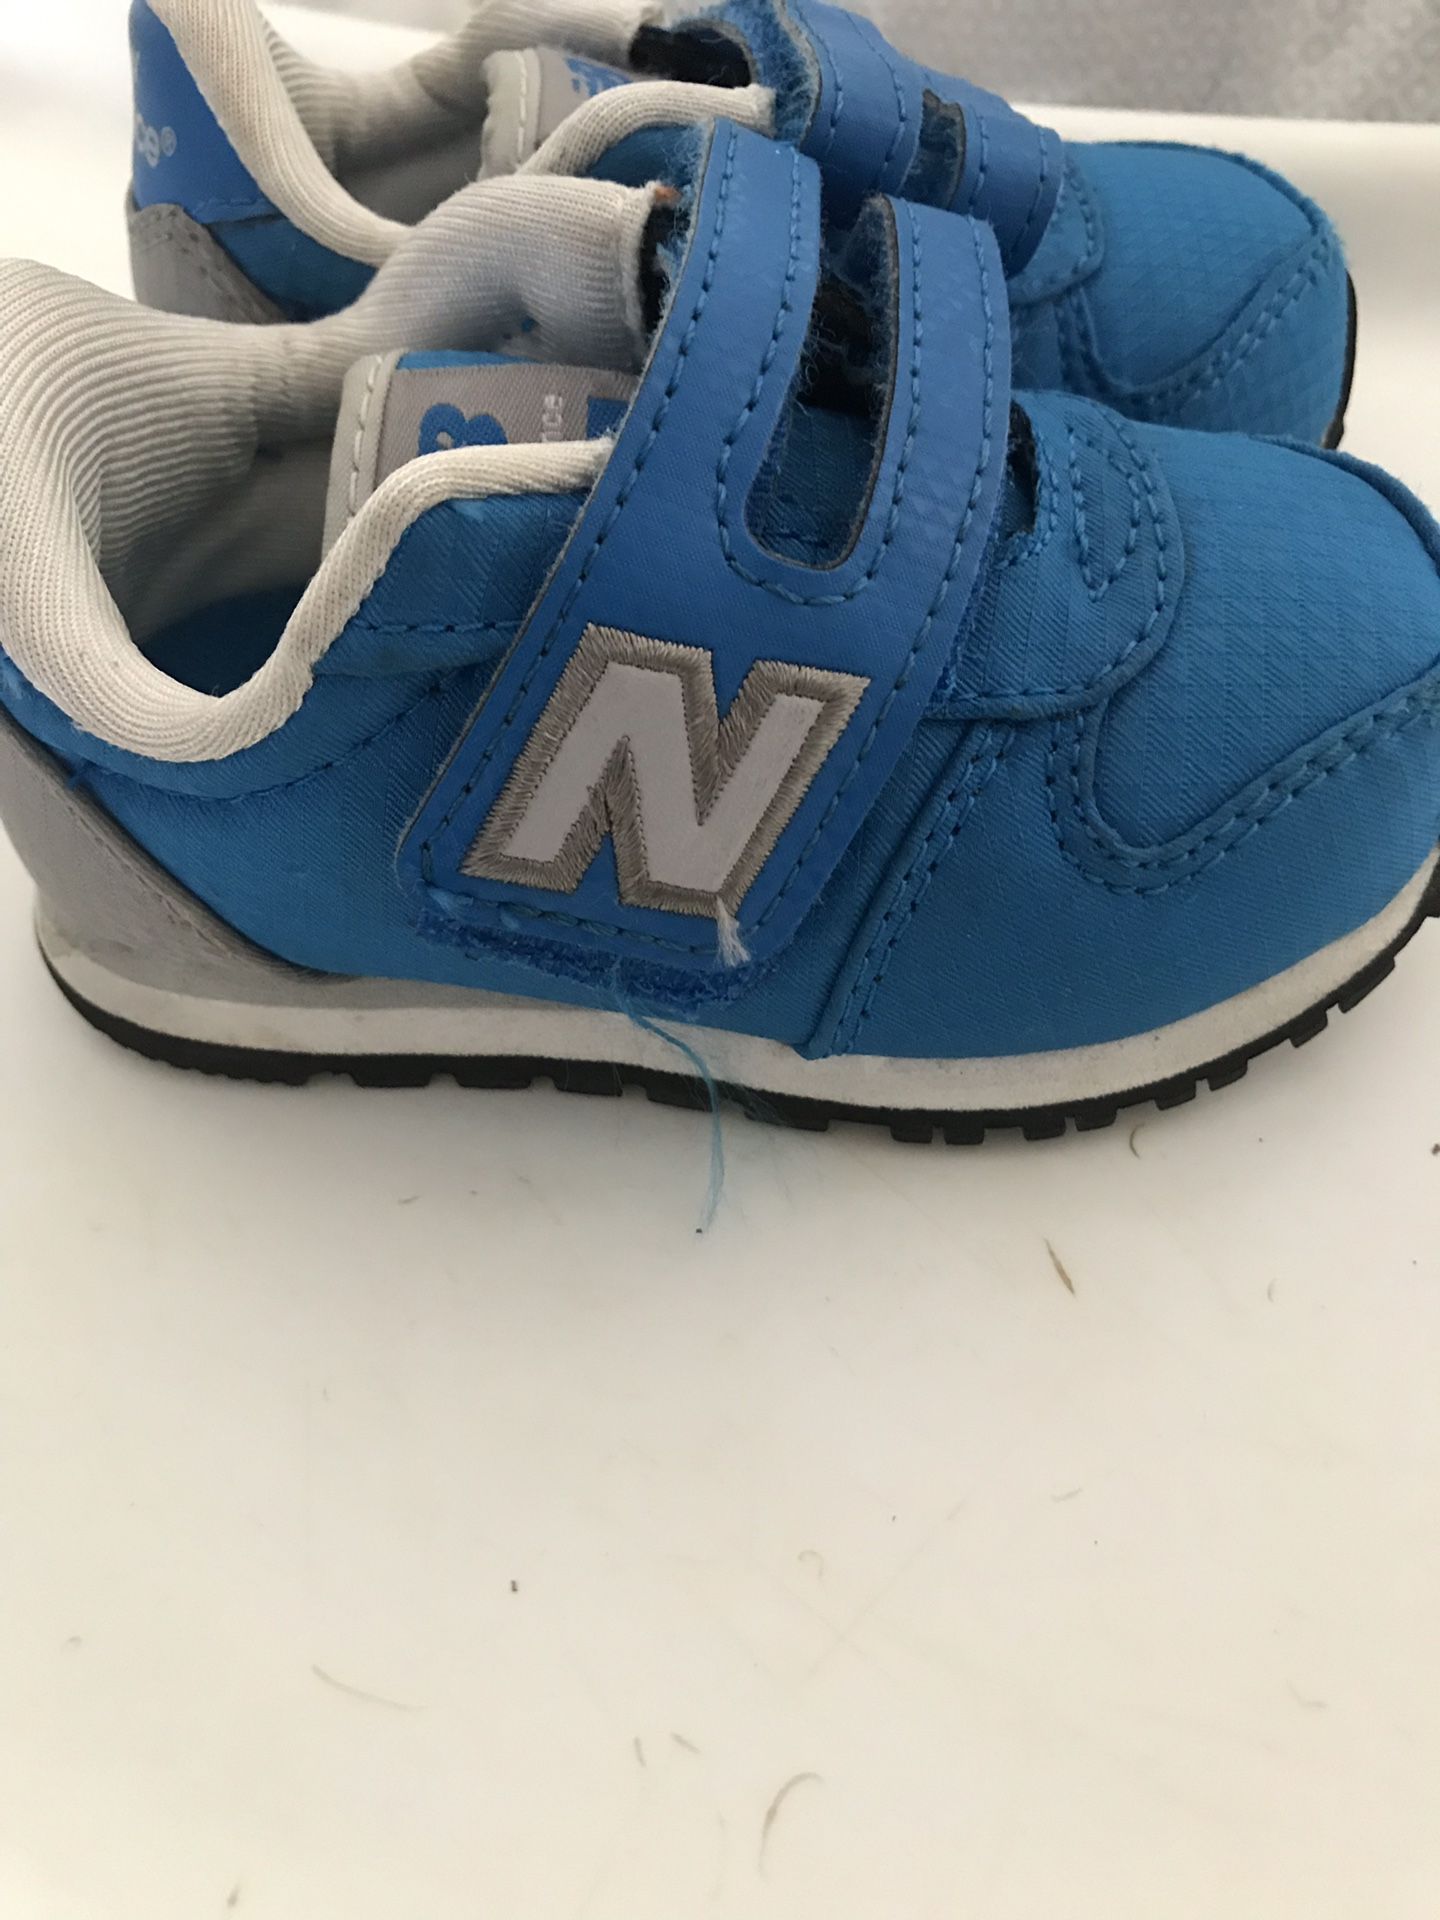 New Balance Toddler Tennis Shoes Size 5